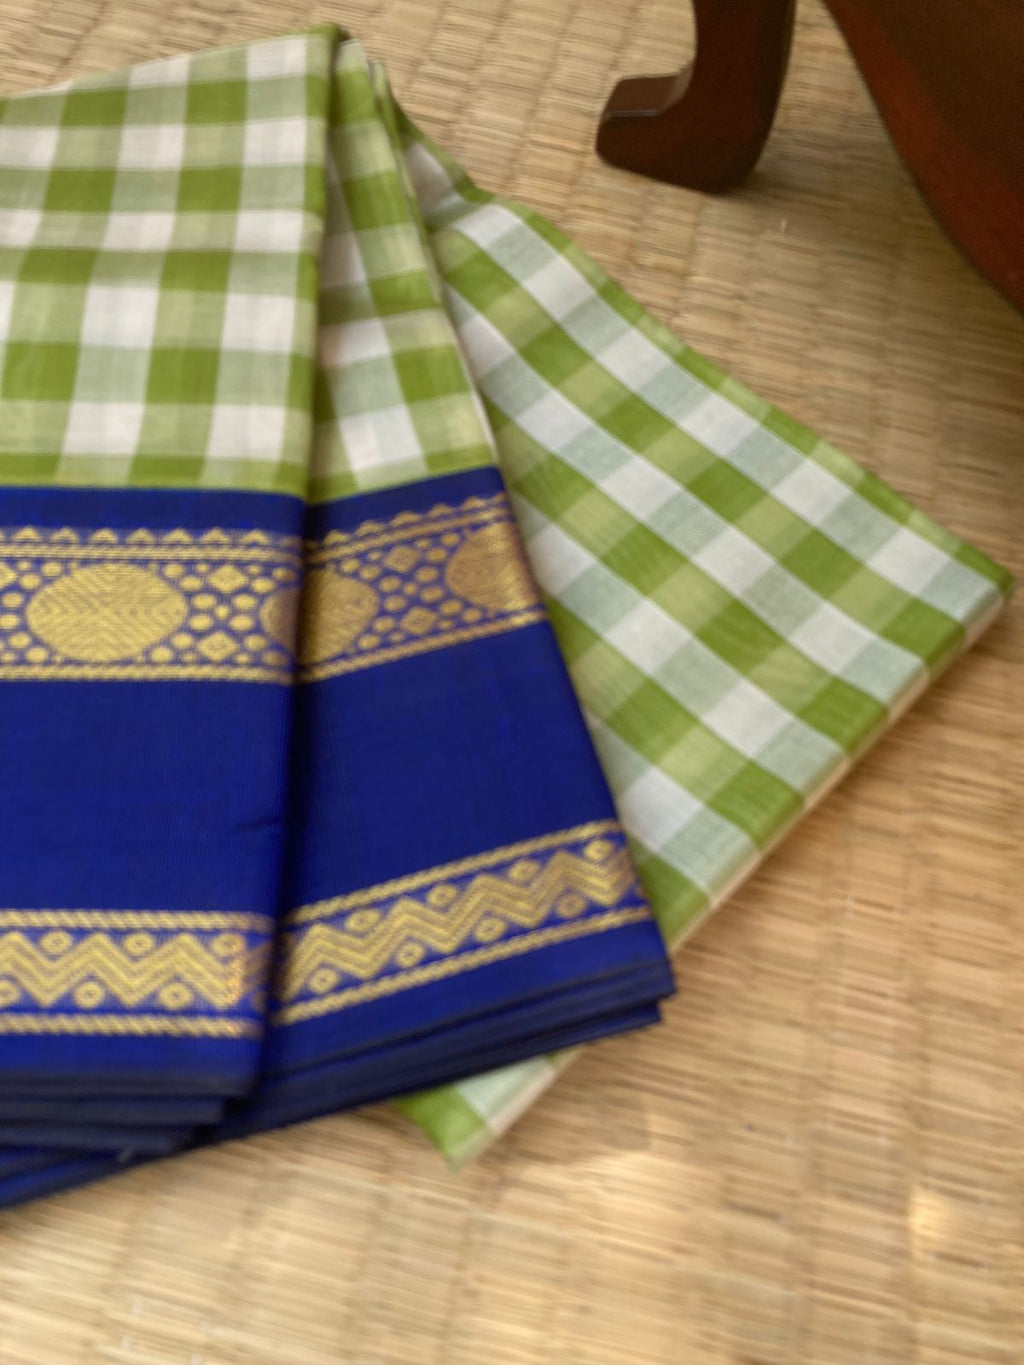 Paalum Palamum Kattams Korvai Silk Cottons - olive and off white with navy blue borders